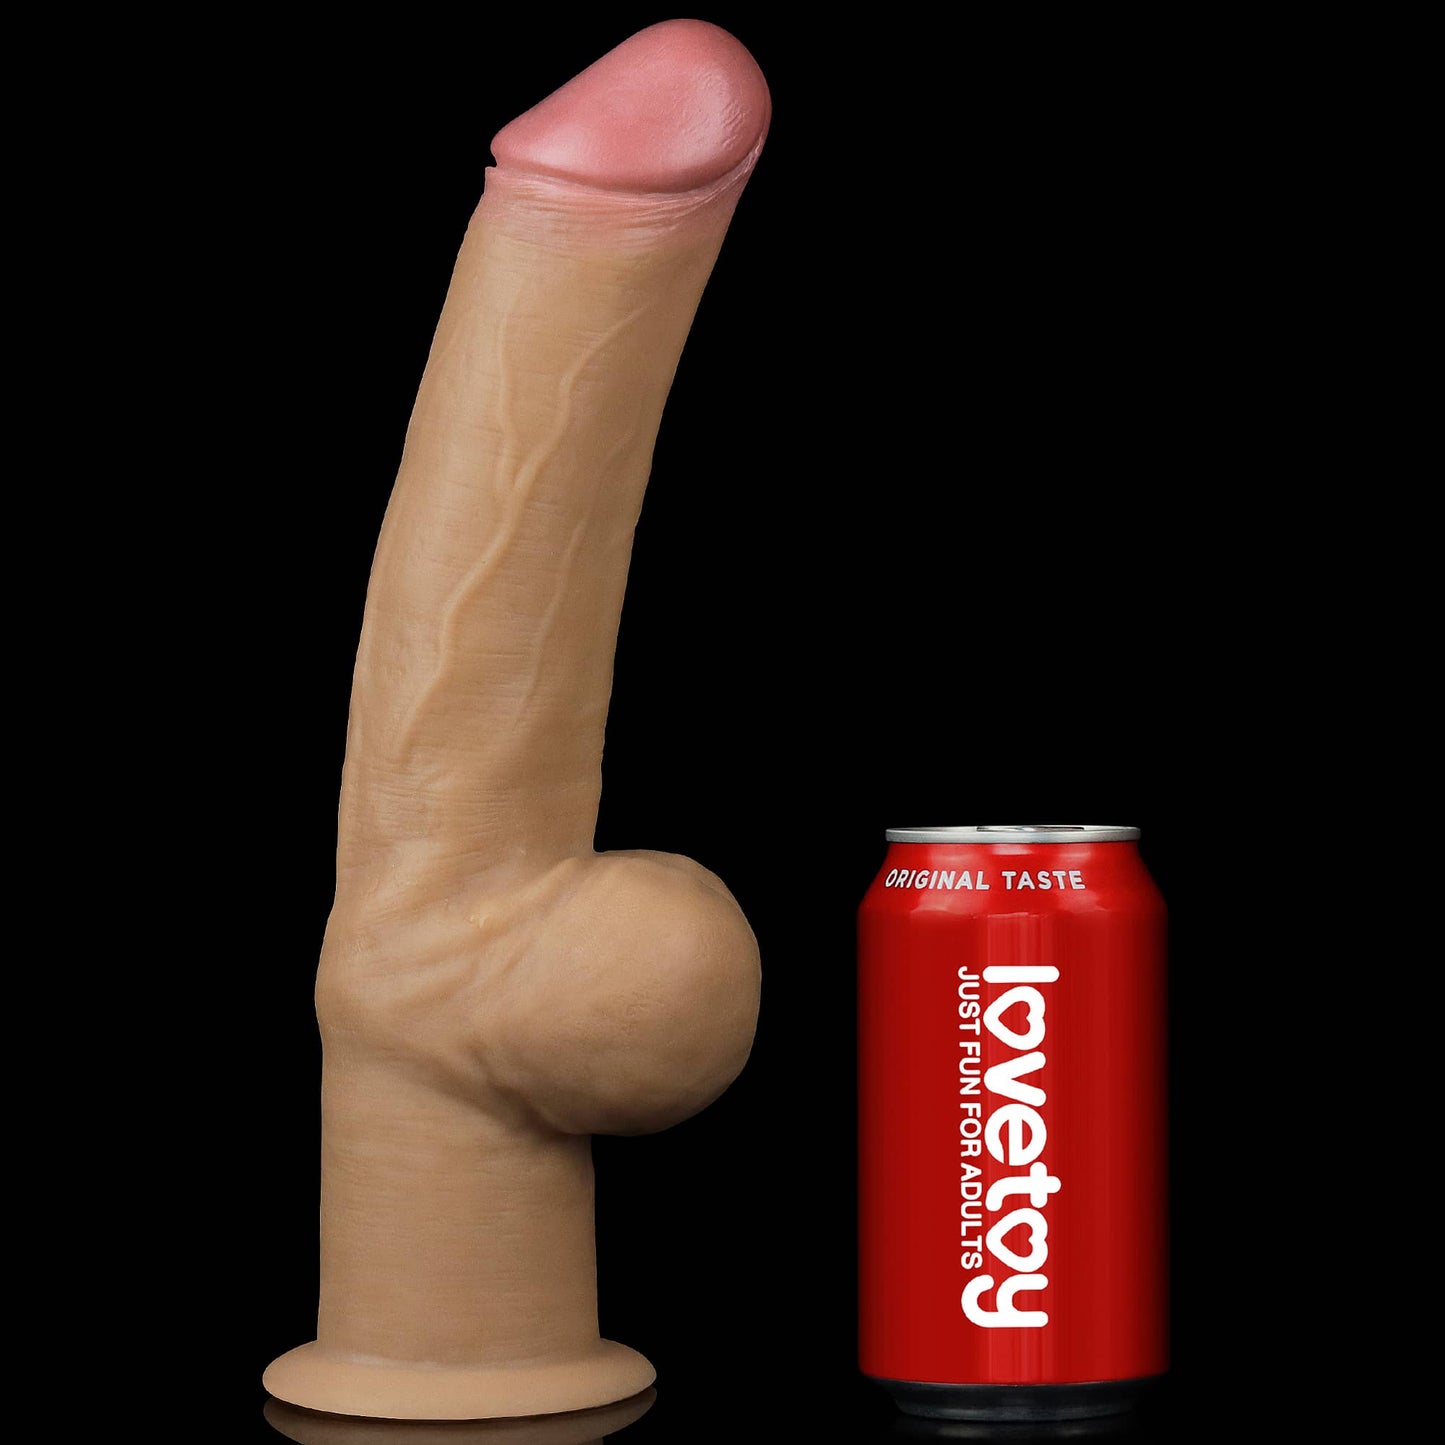 Comparison between the 12 inches silicone dildo with grip handle and beverage cans